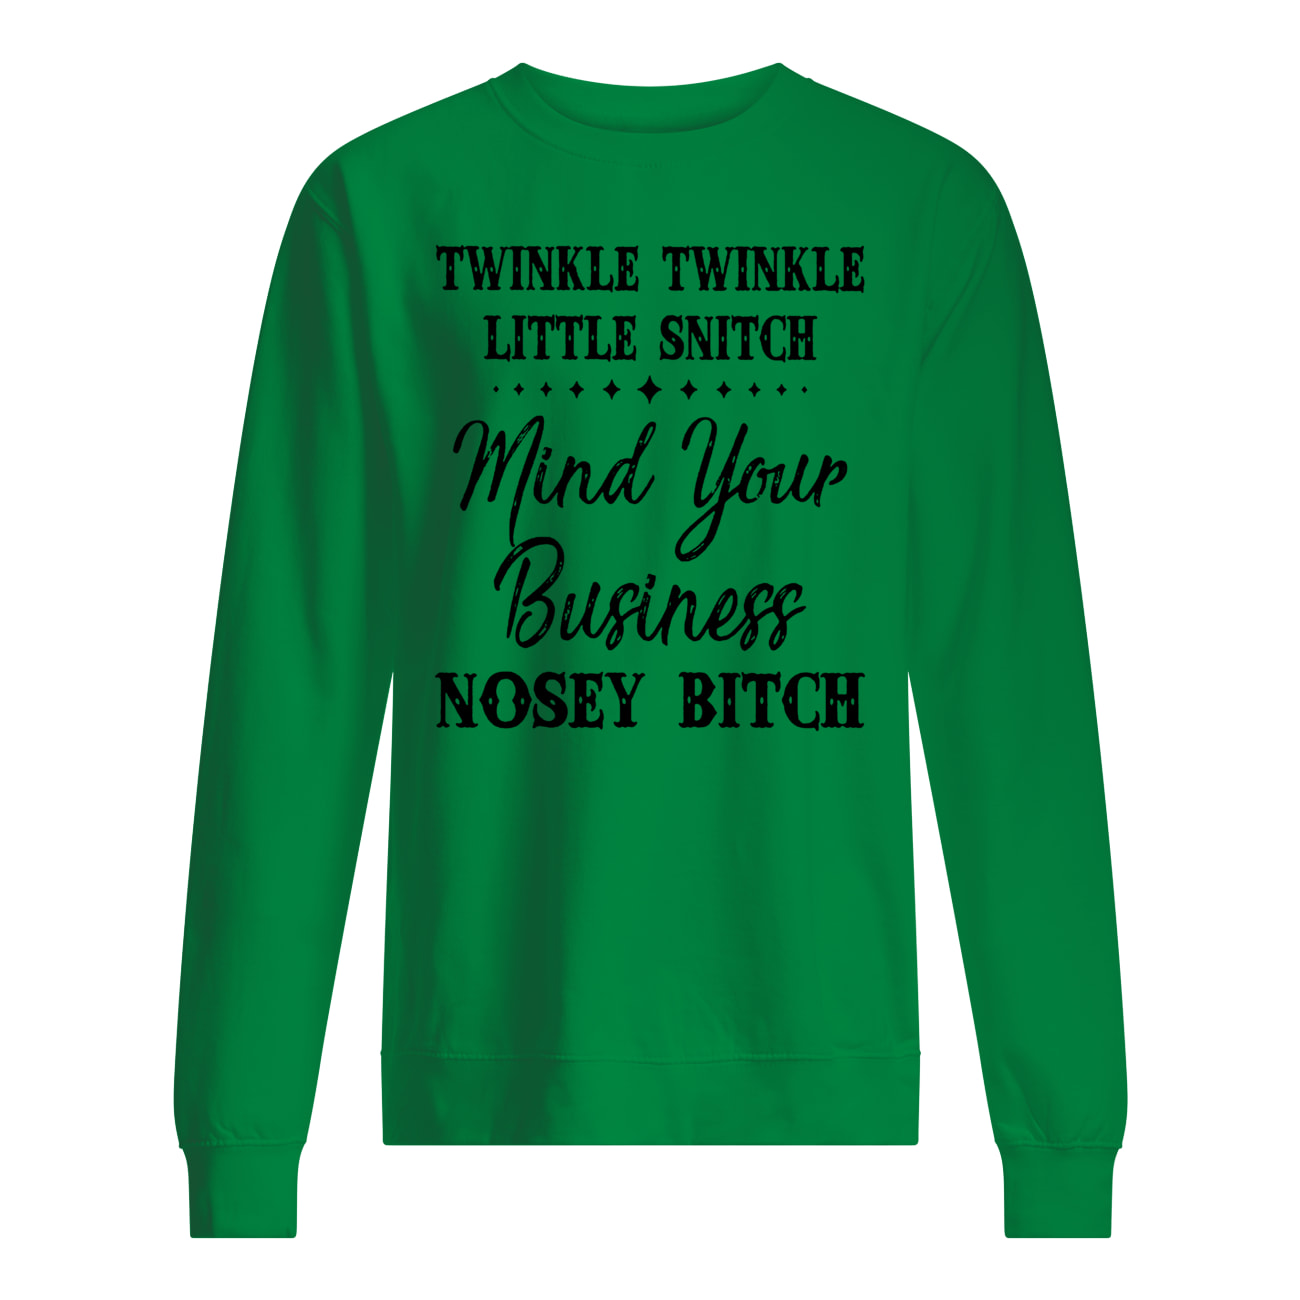 Twinkle twinkle little snitch mind your own business you nosey bitch sweatshirt